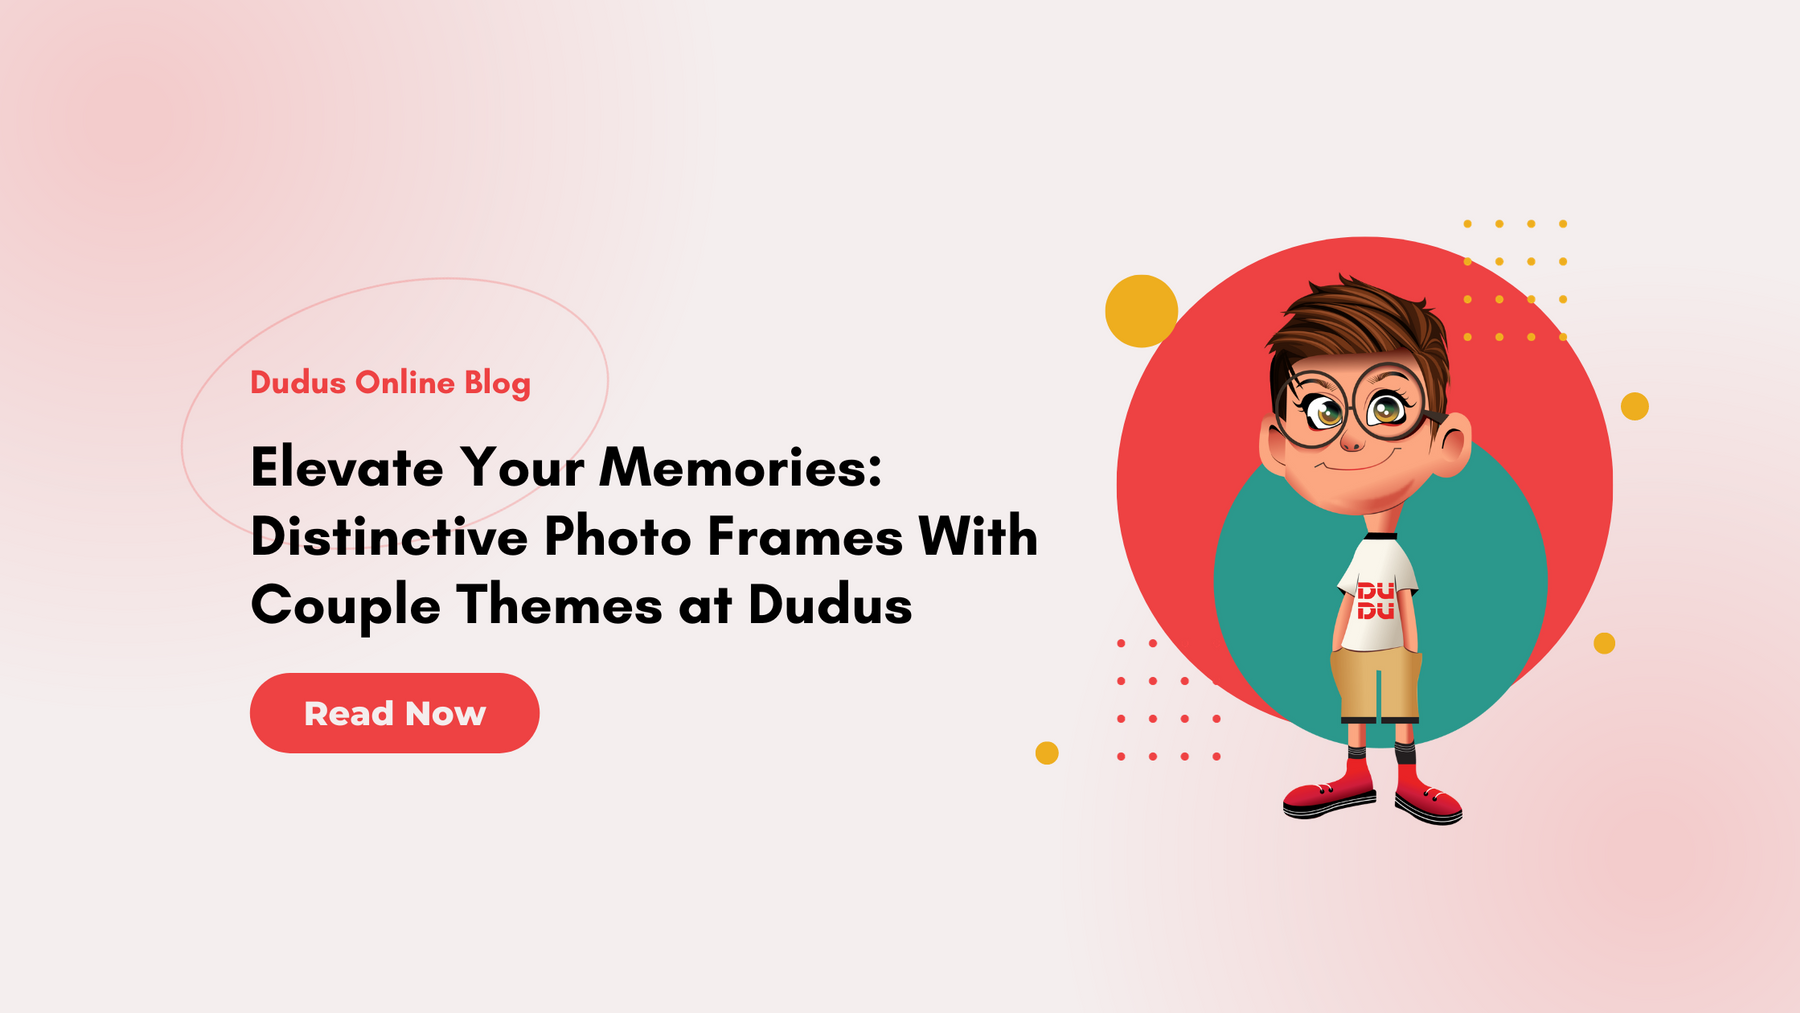 Elevate Your Memories: Distinctive Photo Frames With Couple Themes at Dudus